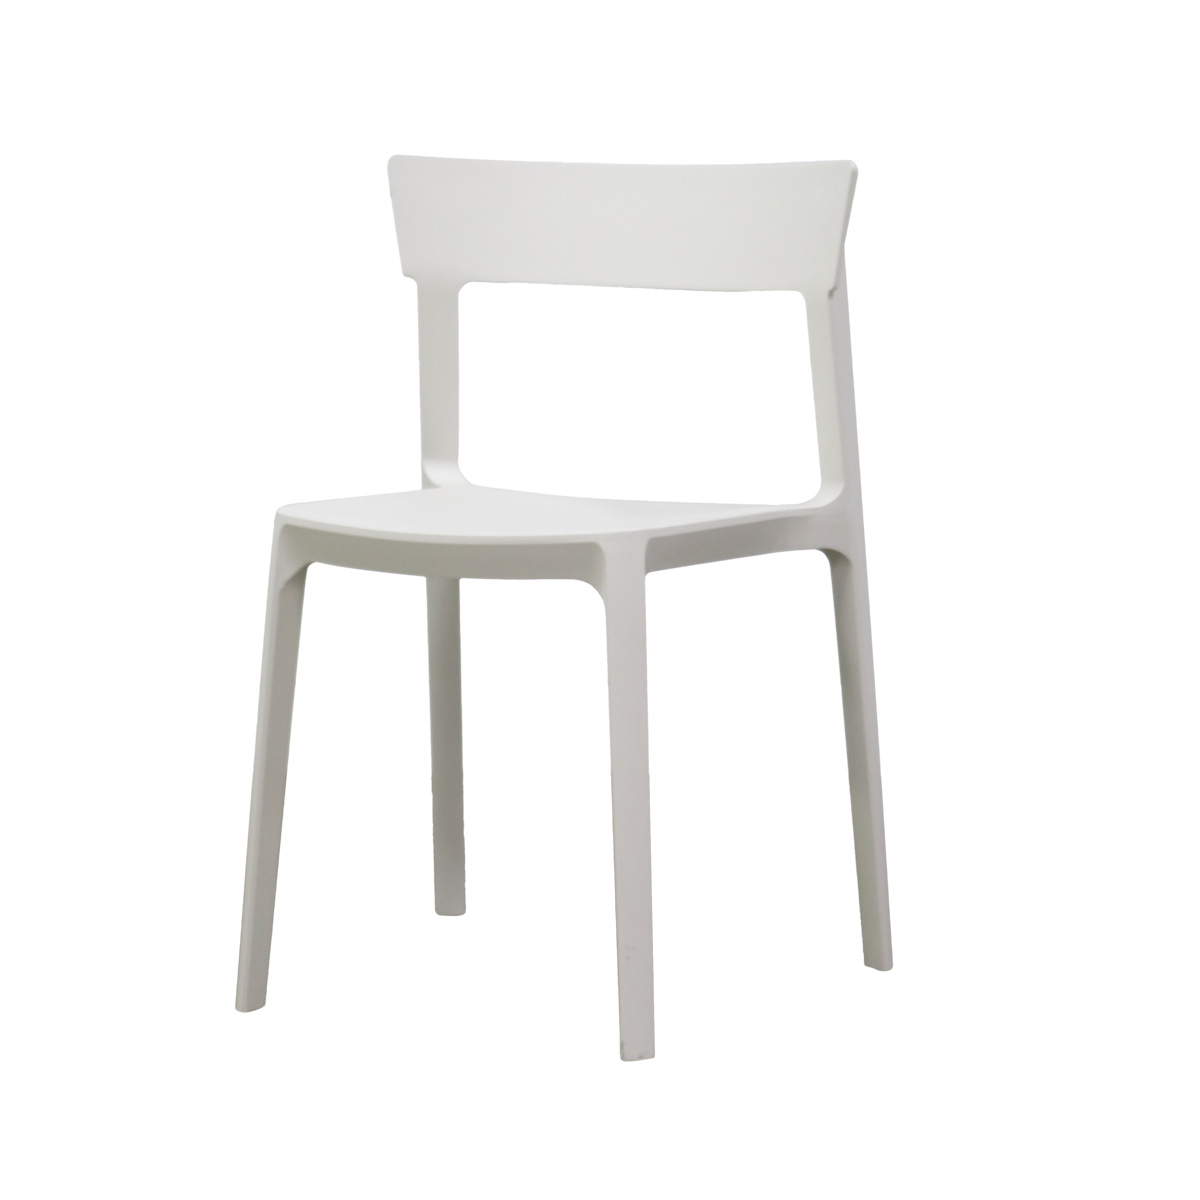 CONNUBIA BY CALLIGARISSKIN CHAIR 스킨 체어 (그레이 아이보리)MADE IN ITALY